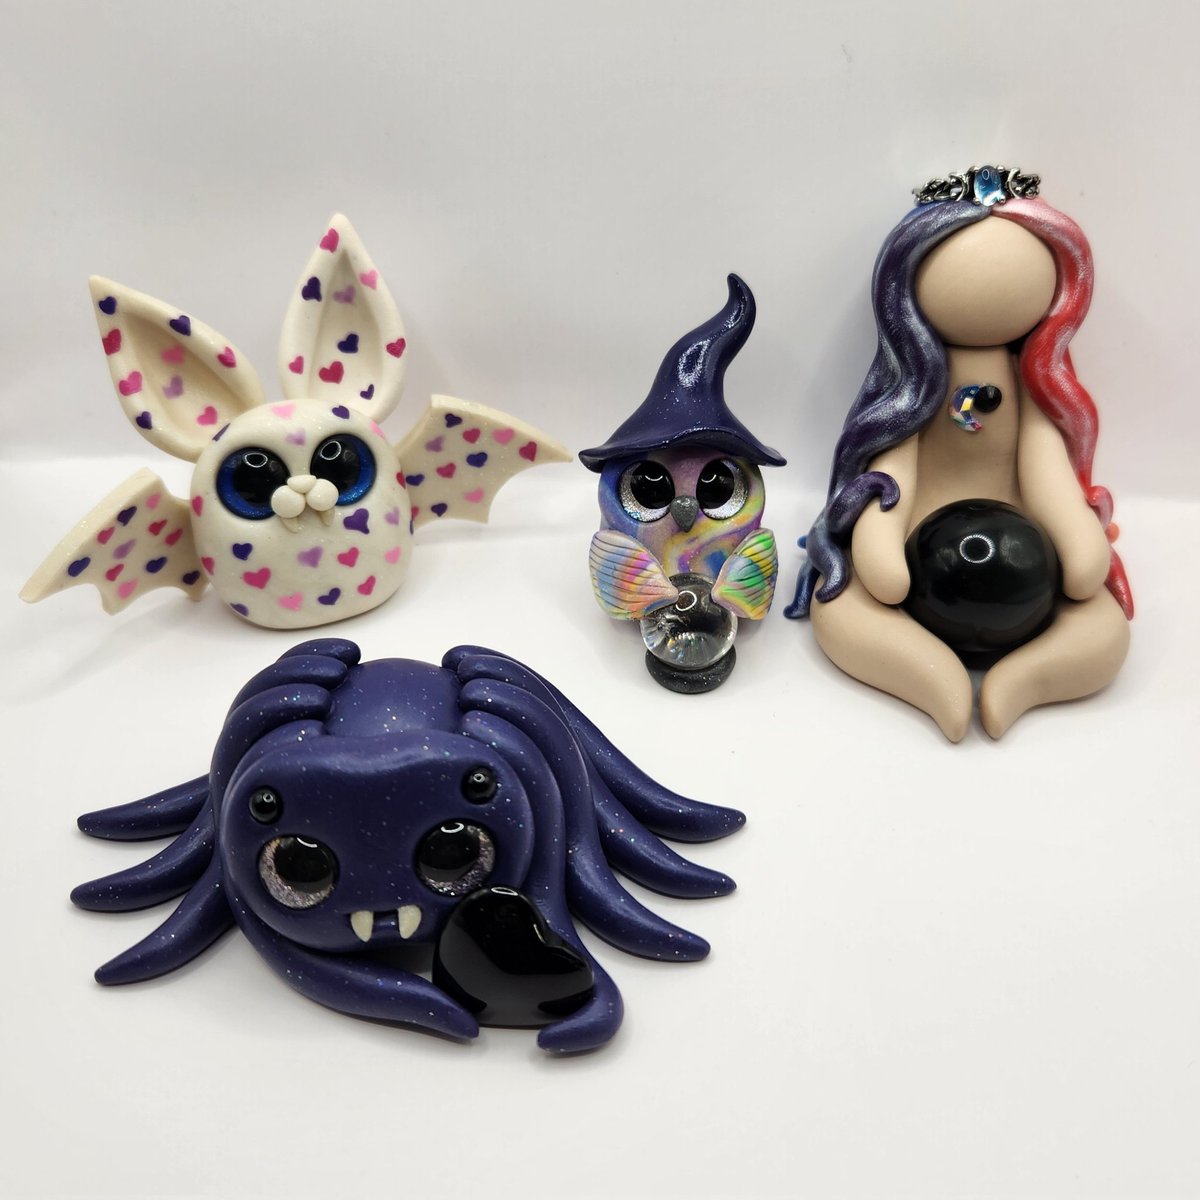 I'm currently doing a giveaway on my Facebook Group- MoonCloverCreations Fan Group- come be a part of my little community & enter to win these adorable cuties I made, just in time for Valentines Day! 

#Giveaway #handmade #artist #clayart #ooak #unique #itsfree #Clay